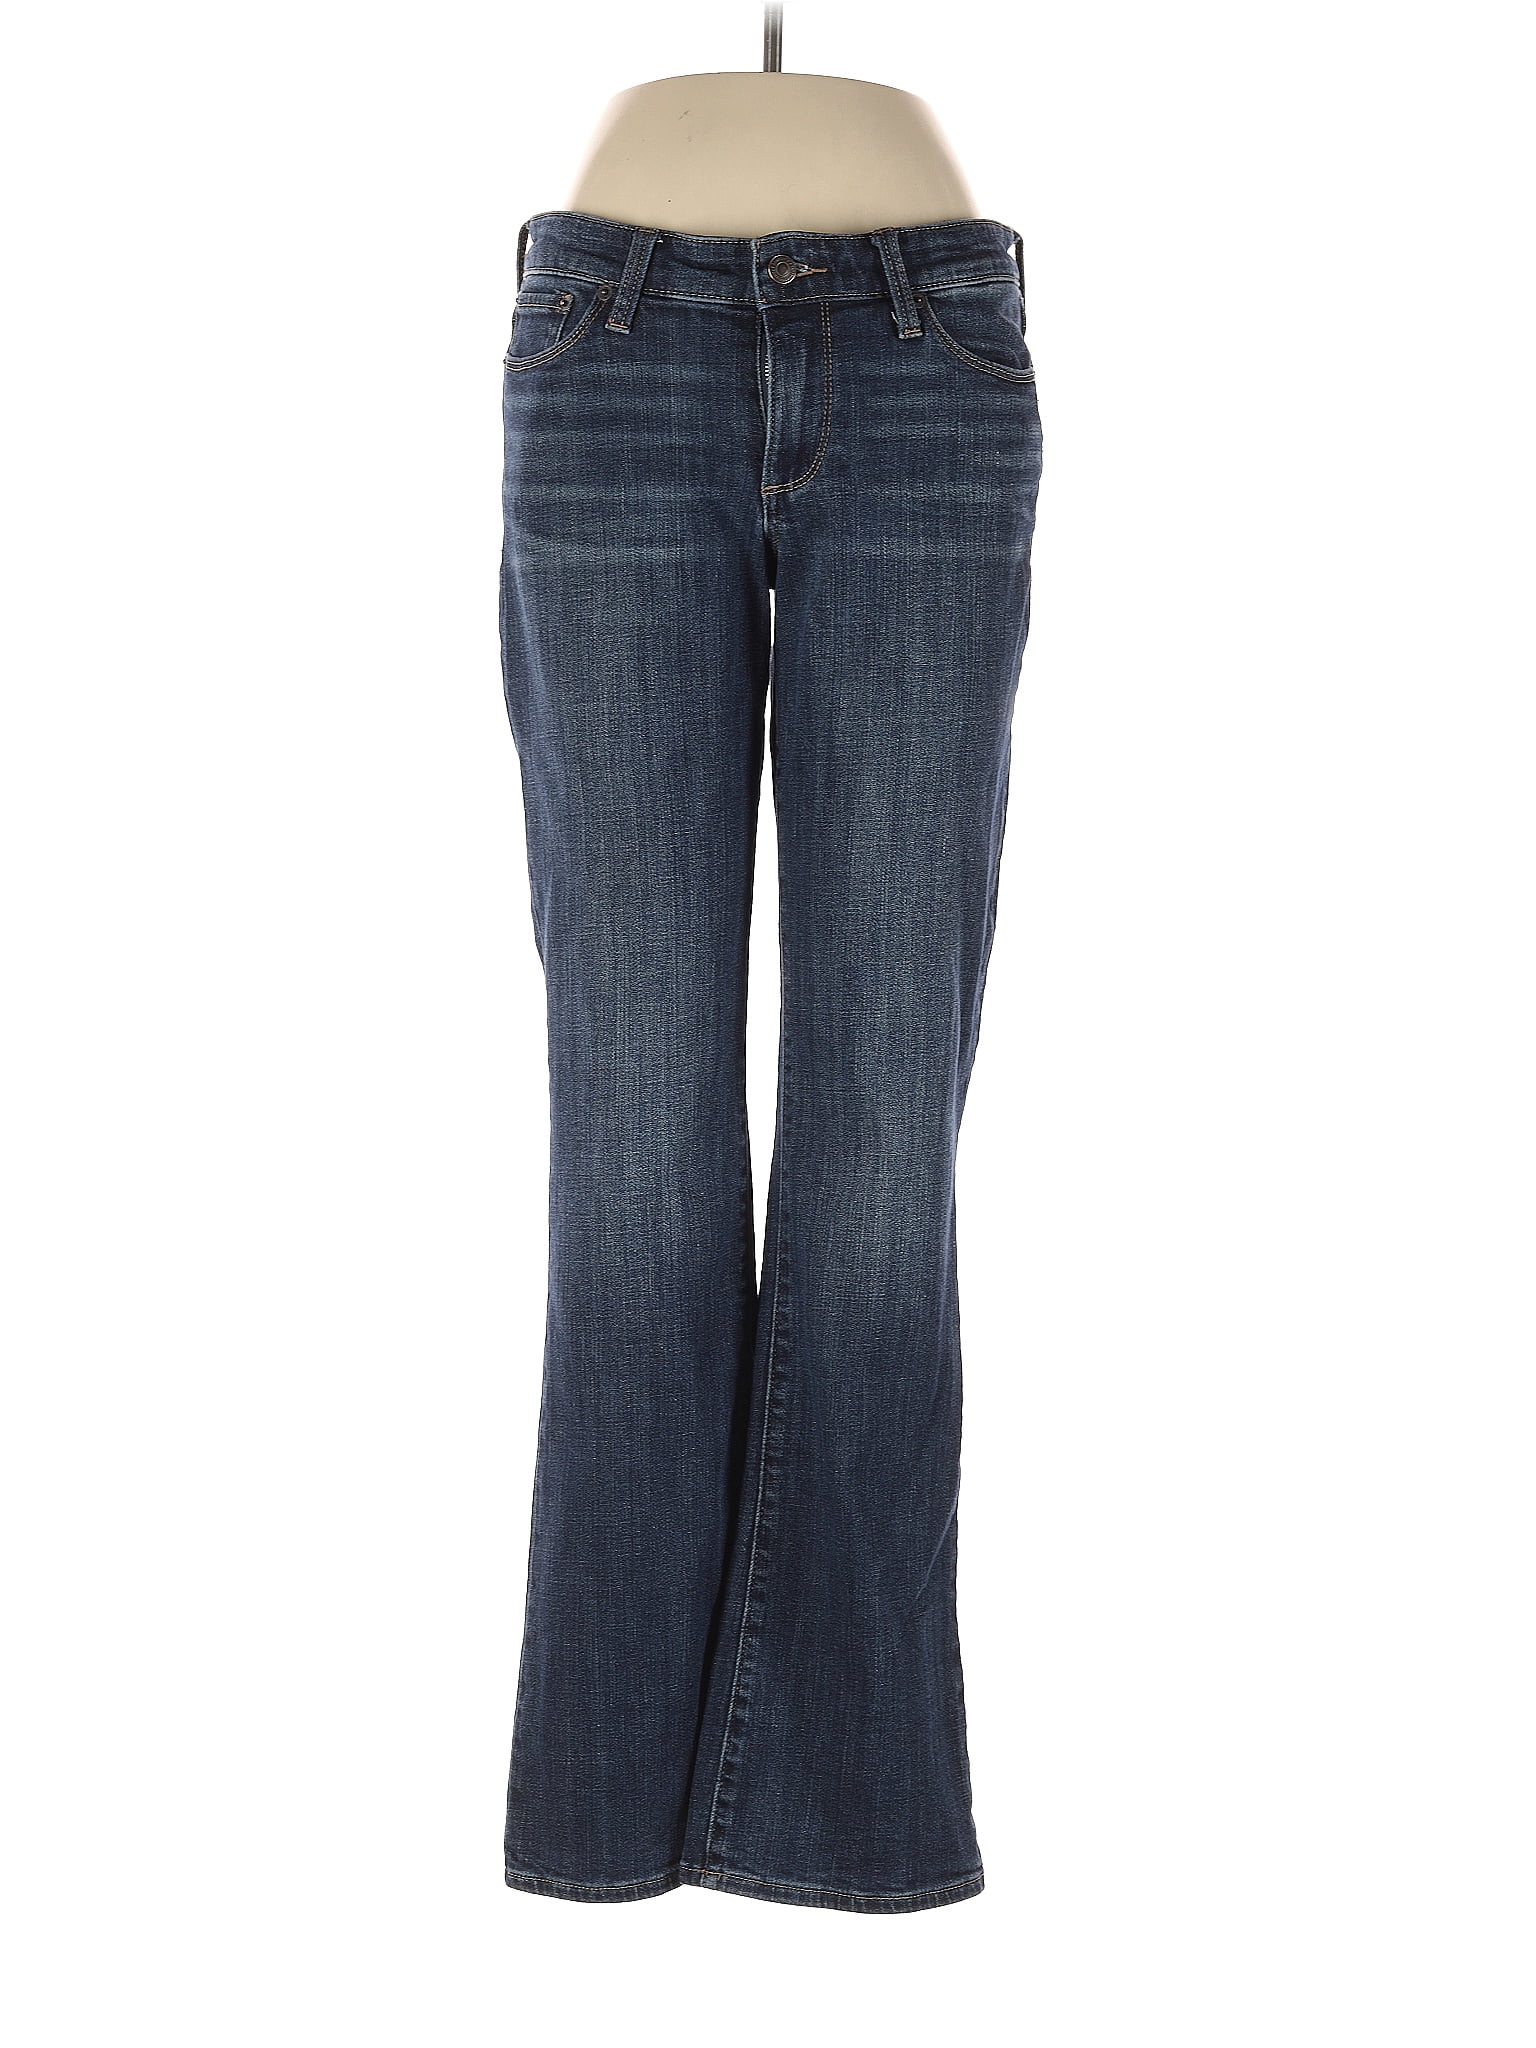 Lucky Brand Solid Blue Jeans Size 8 - 69% off